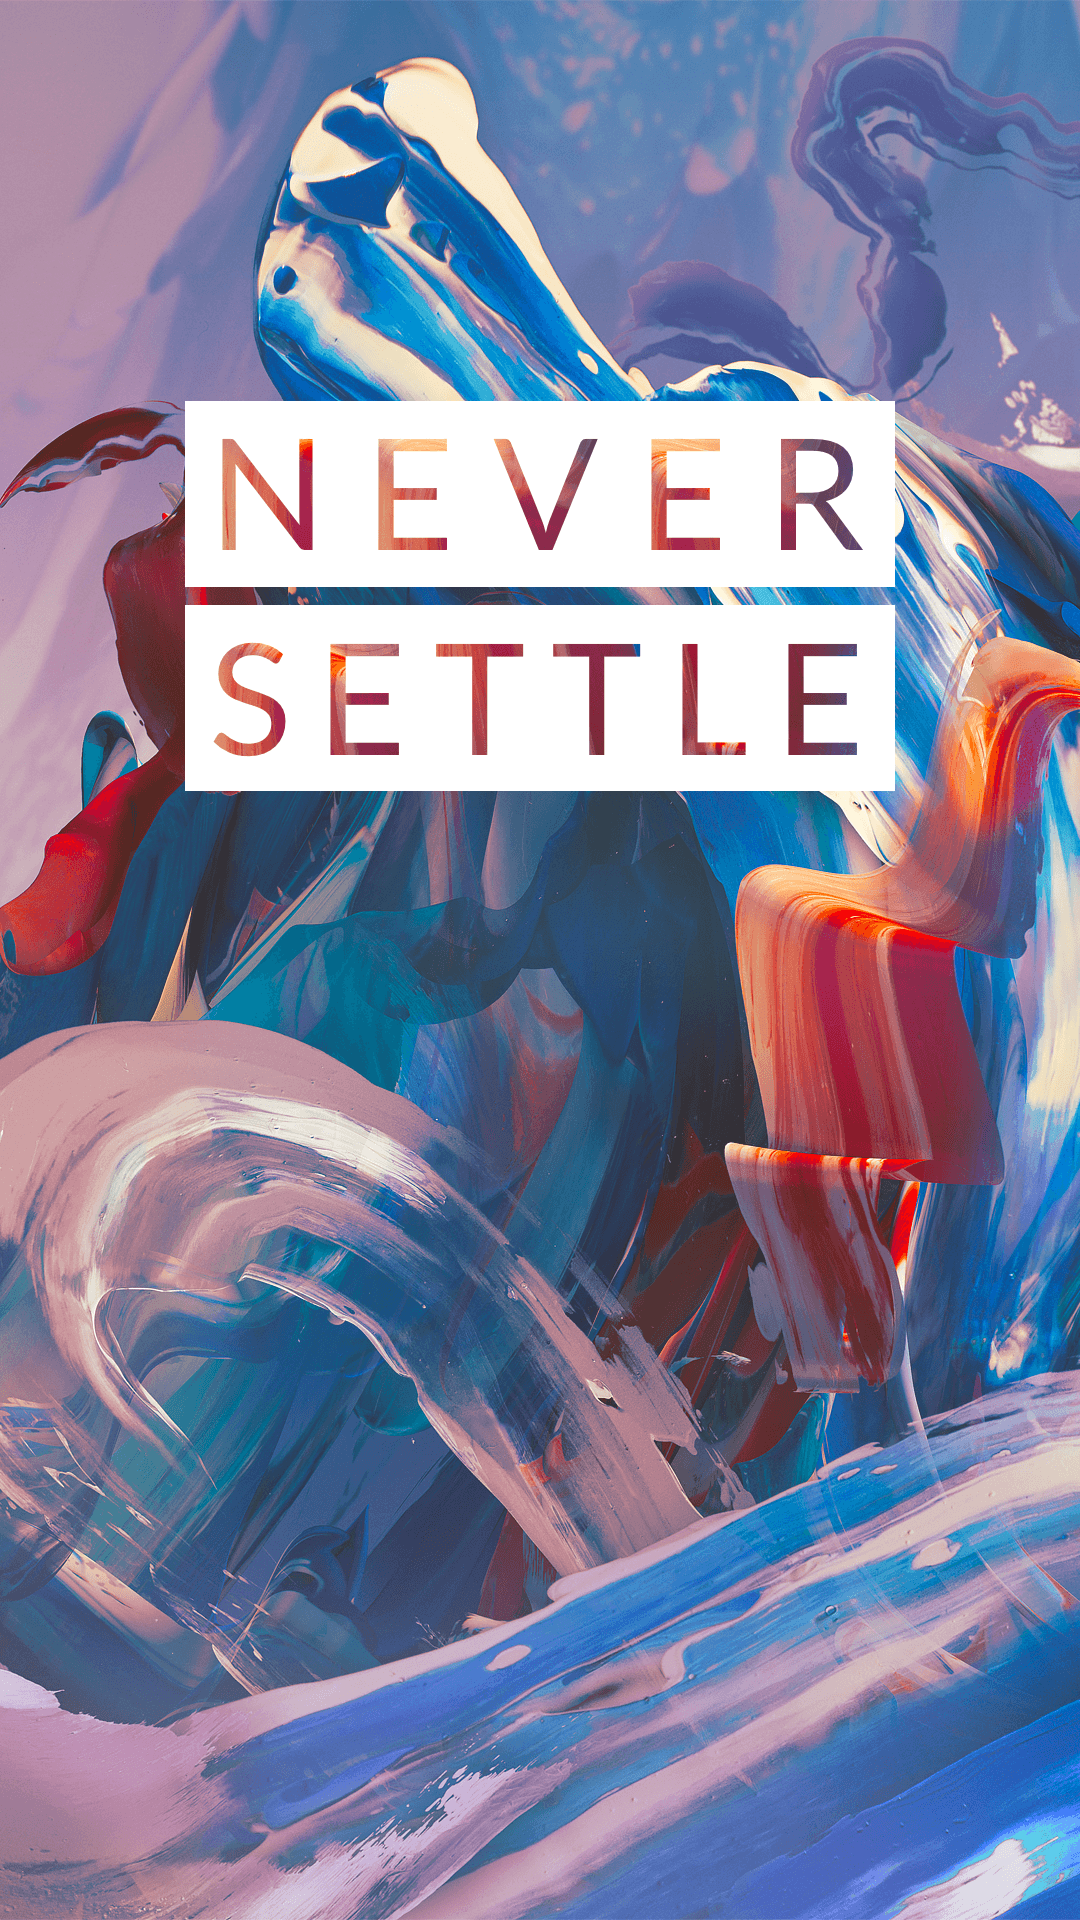 Never settle Wallpapers Download | MobCup